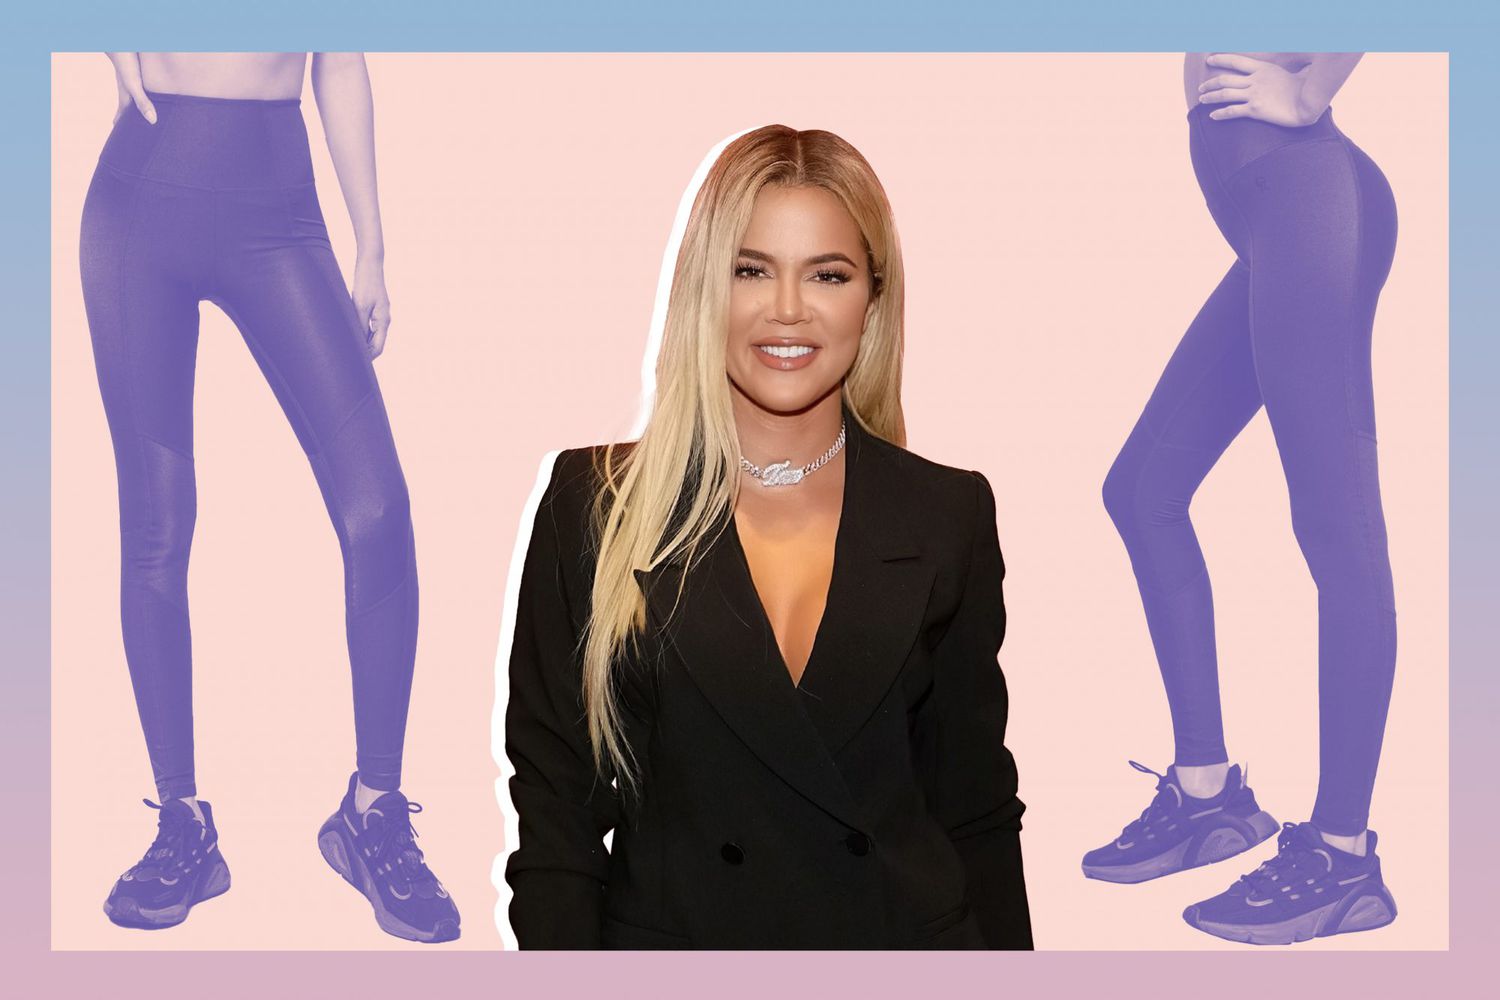 Khloe k leggings and workout attire-GettyImages-1183233485